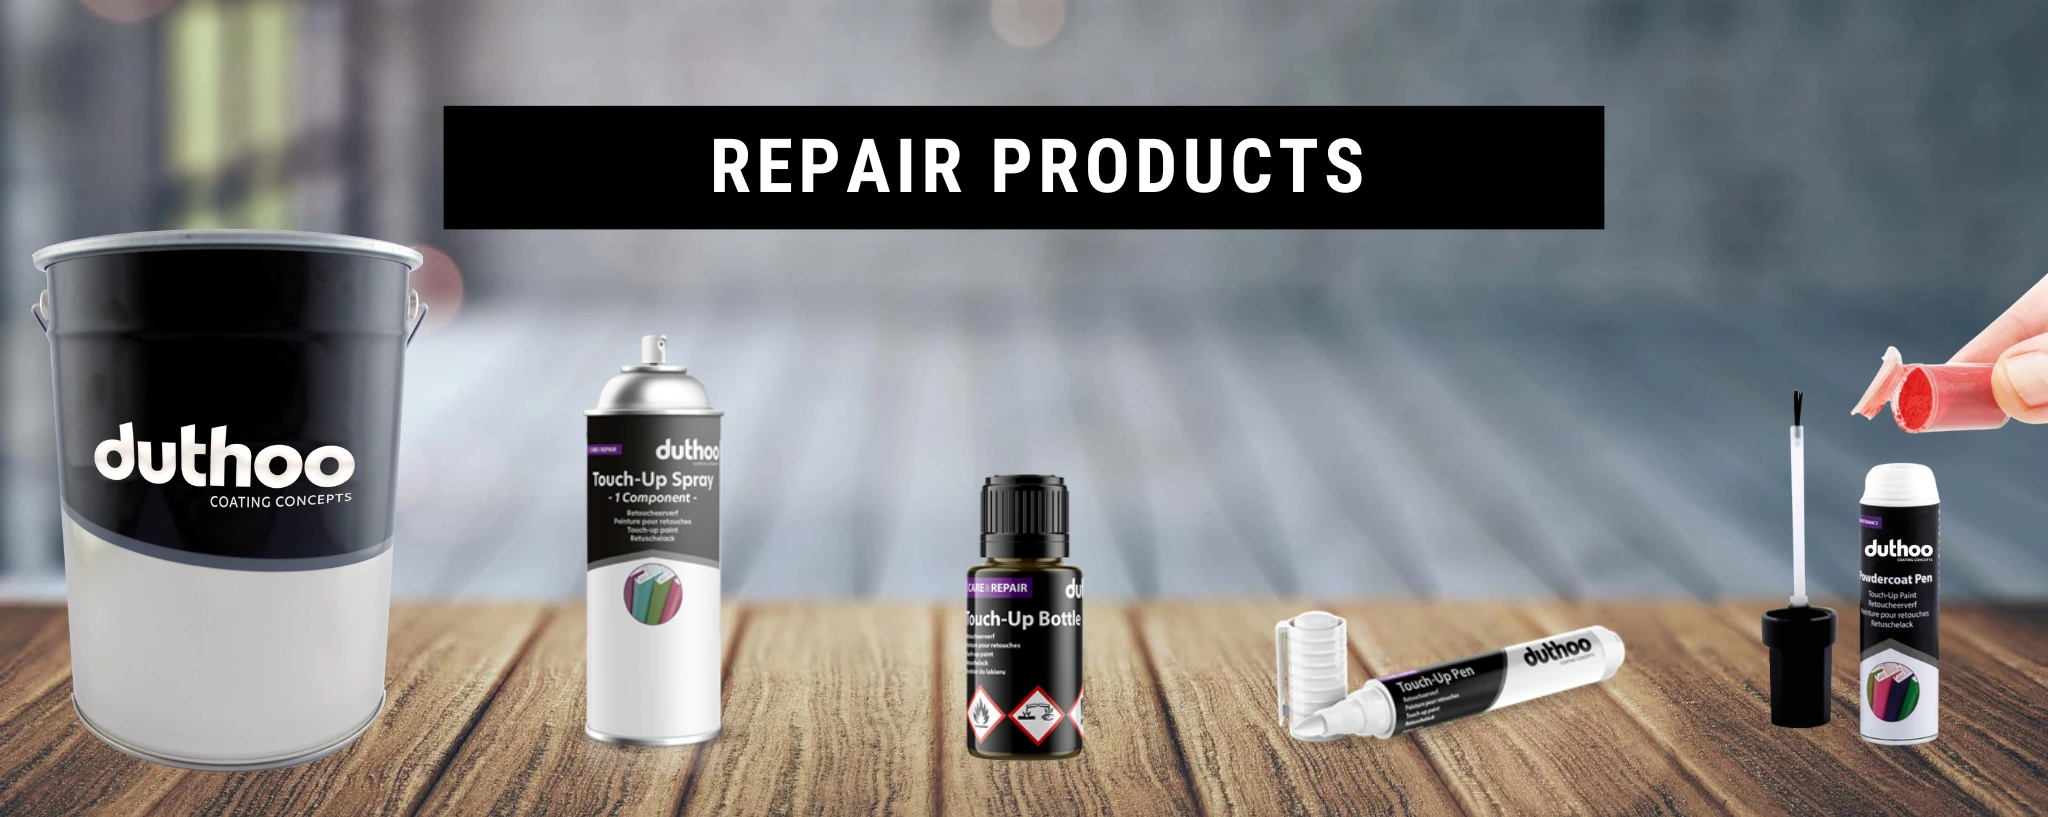 Repair products